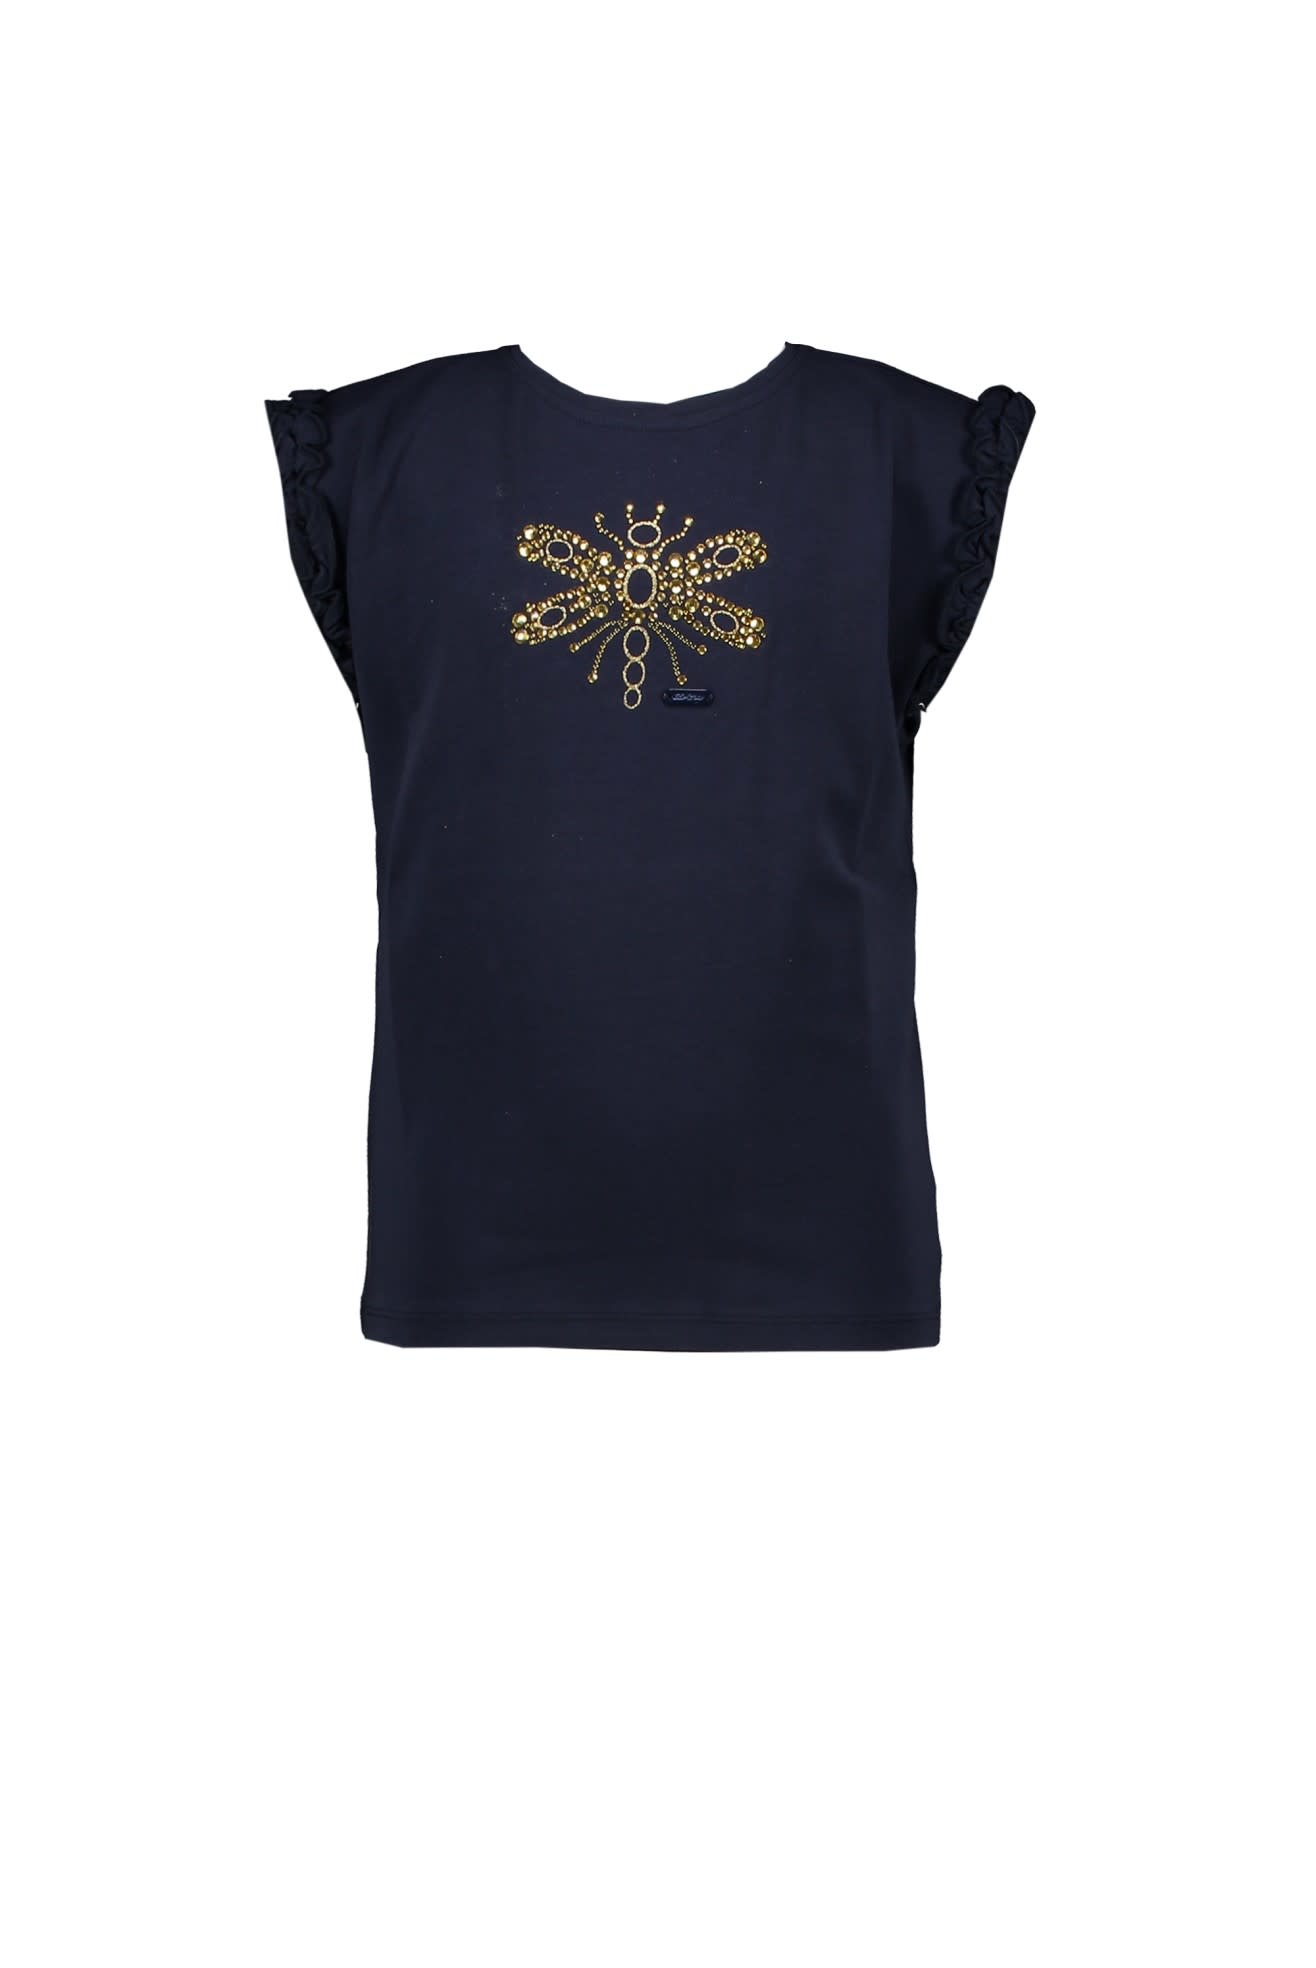 Nopaly Dragonfly Tee - Navy